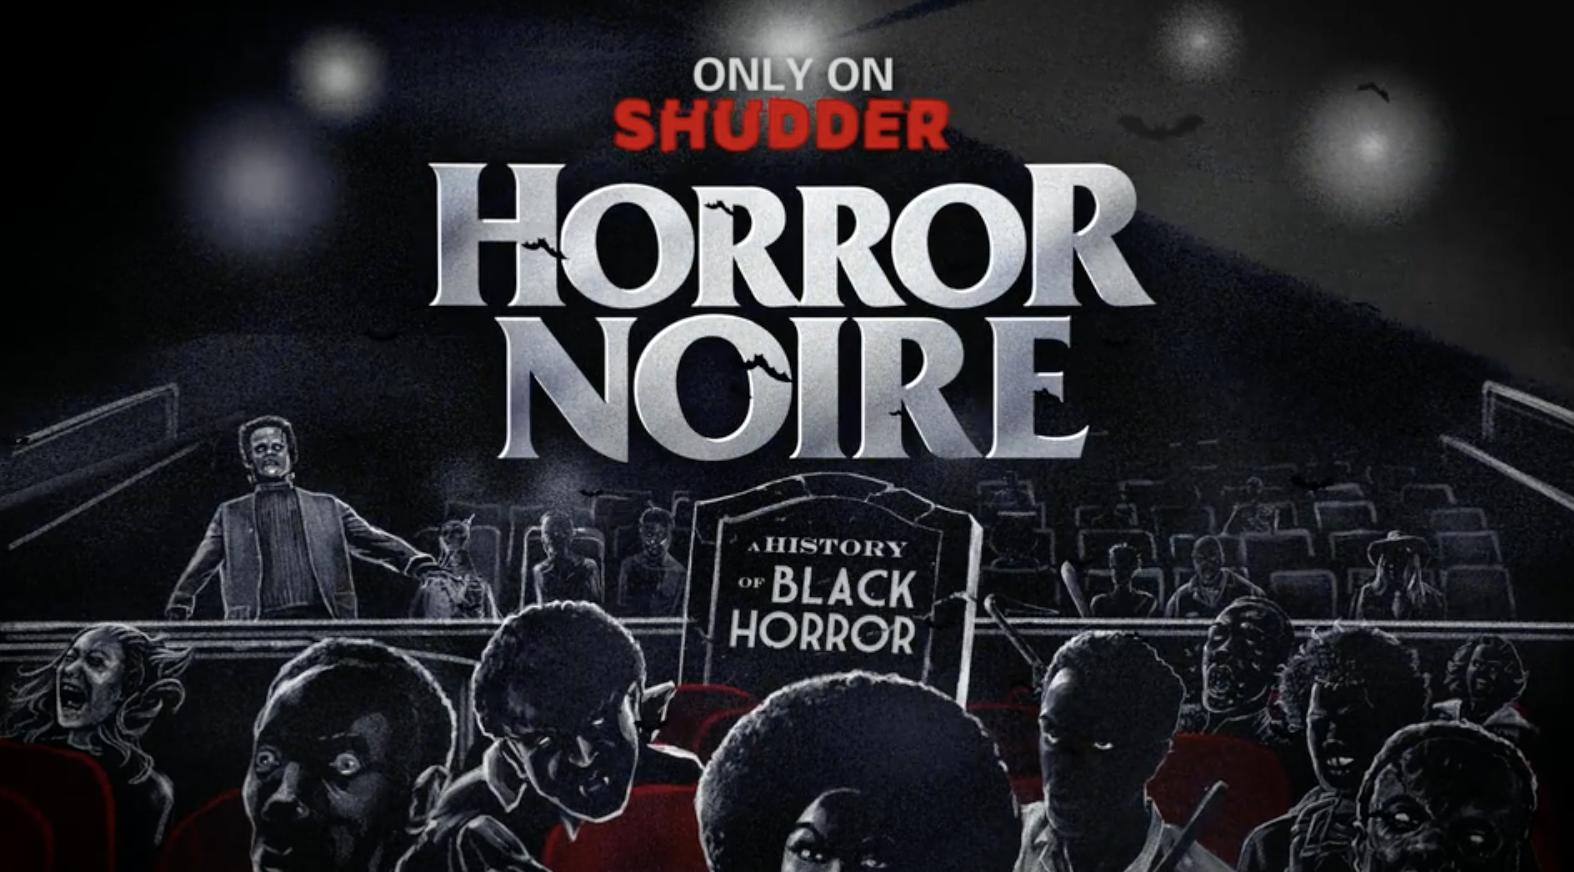 Women In Horror Month Interview: Co-Writer/Producer Ashlee Blackwell & Executive Producer Tananarive Due for HORROR NOIRE